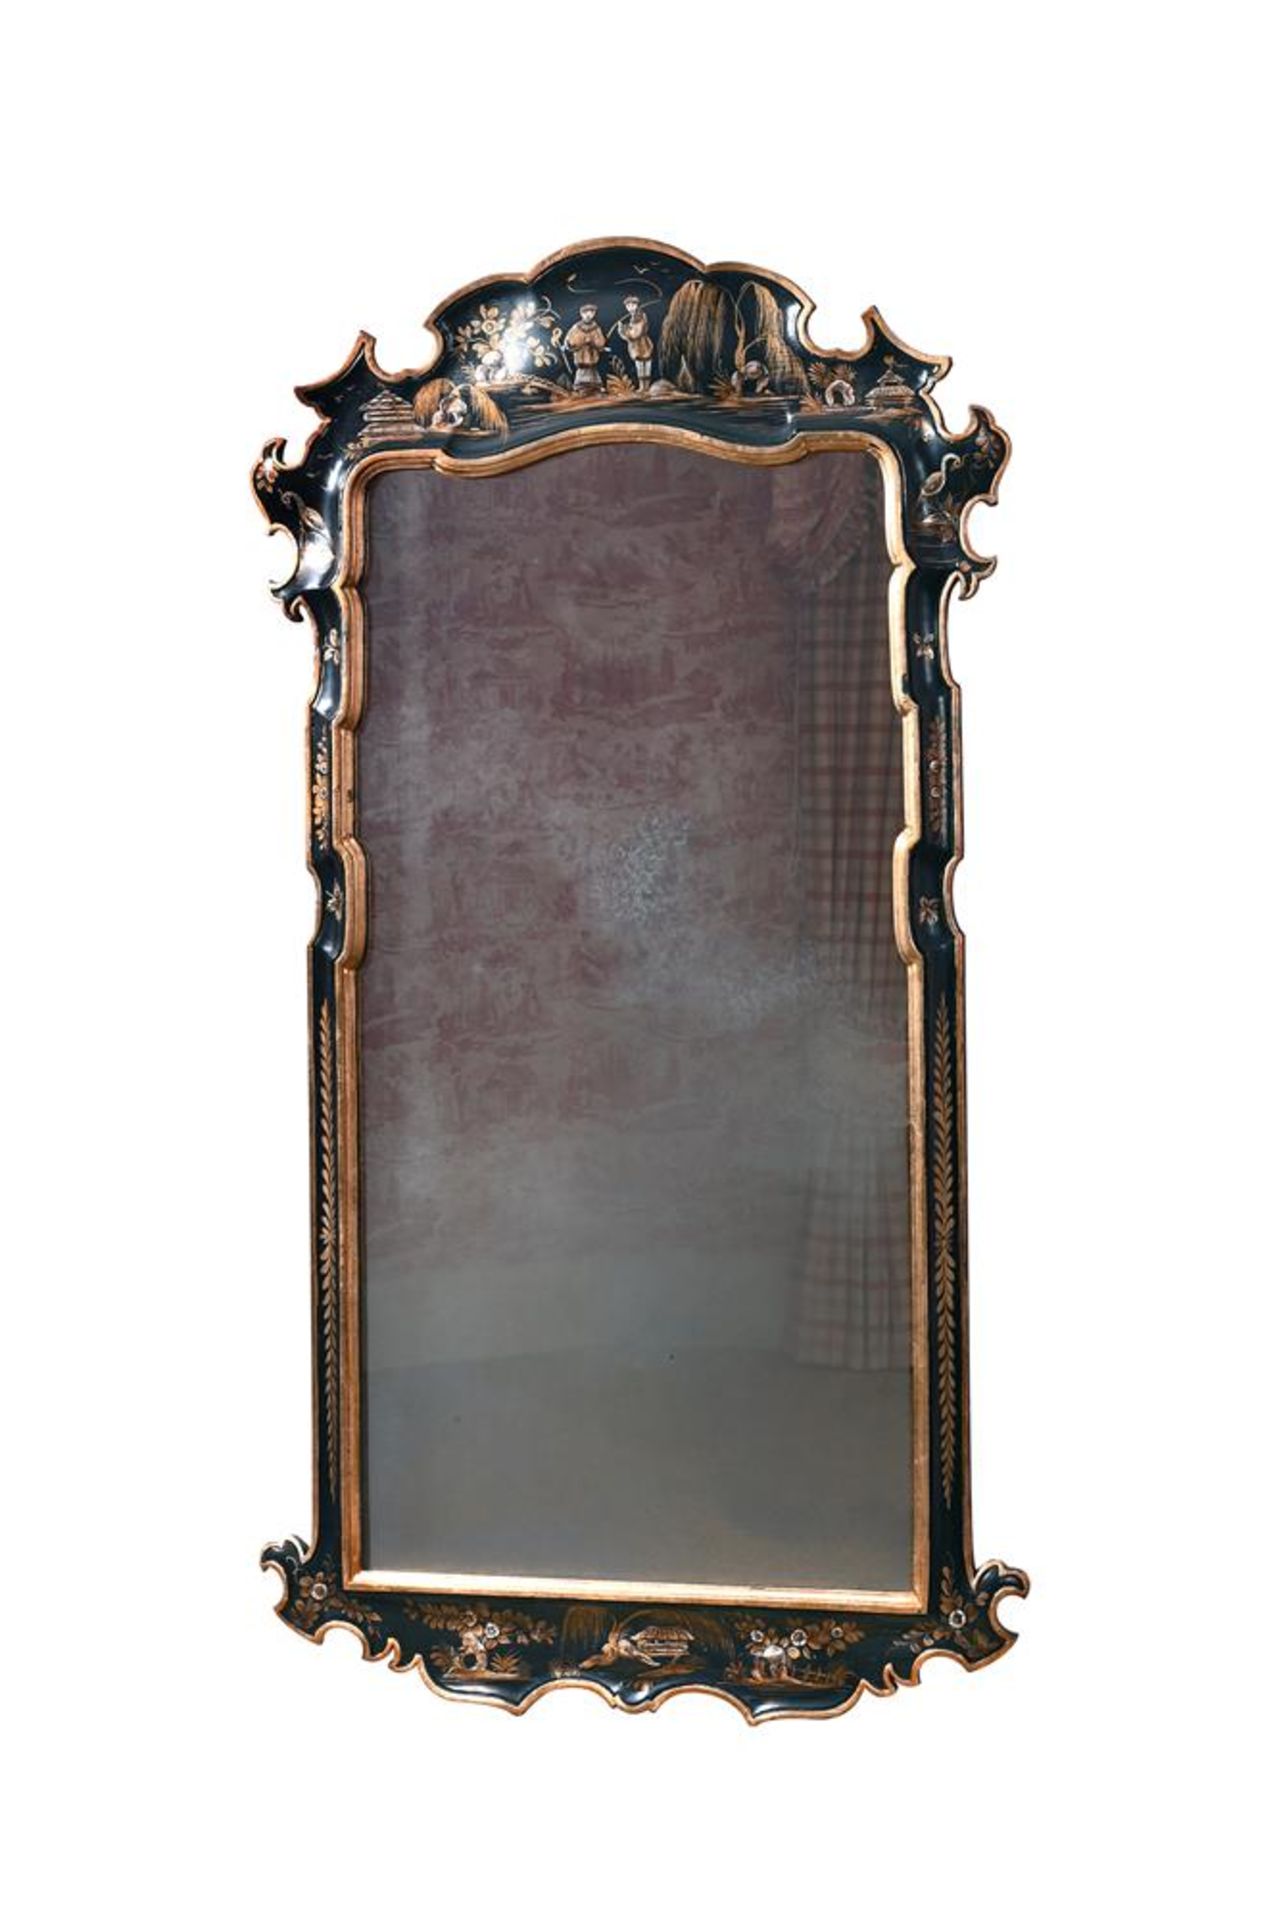 A BLACK LACQUER AND PARCEL GILT WALL MIRROR IN GEORGE II STYLE, 20TH CENTURY